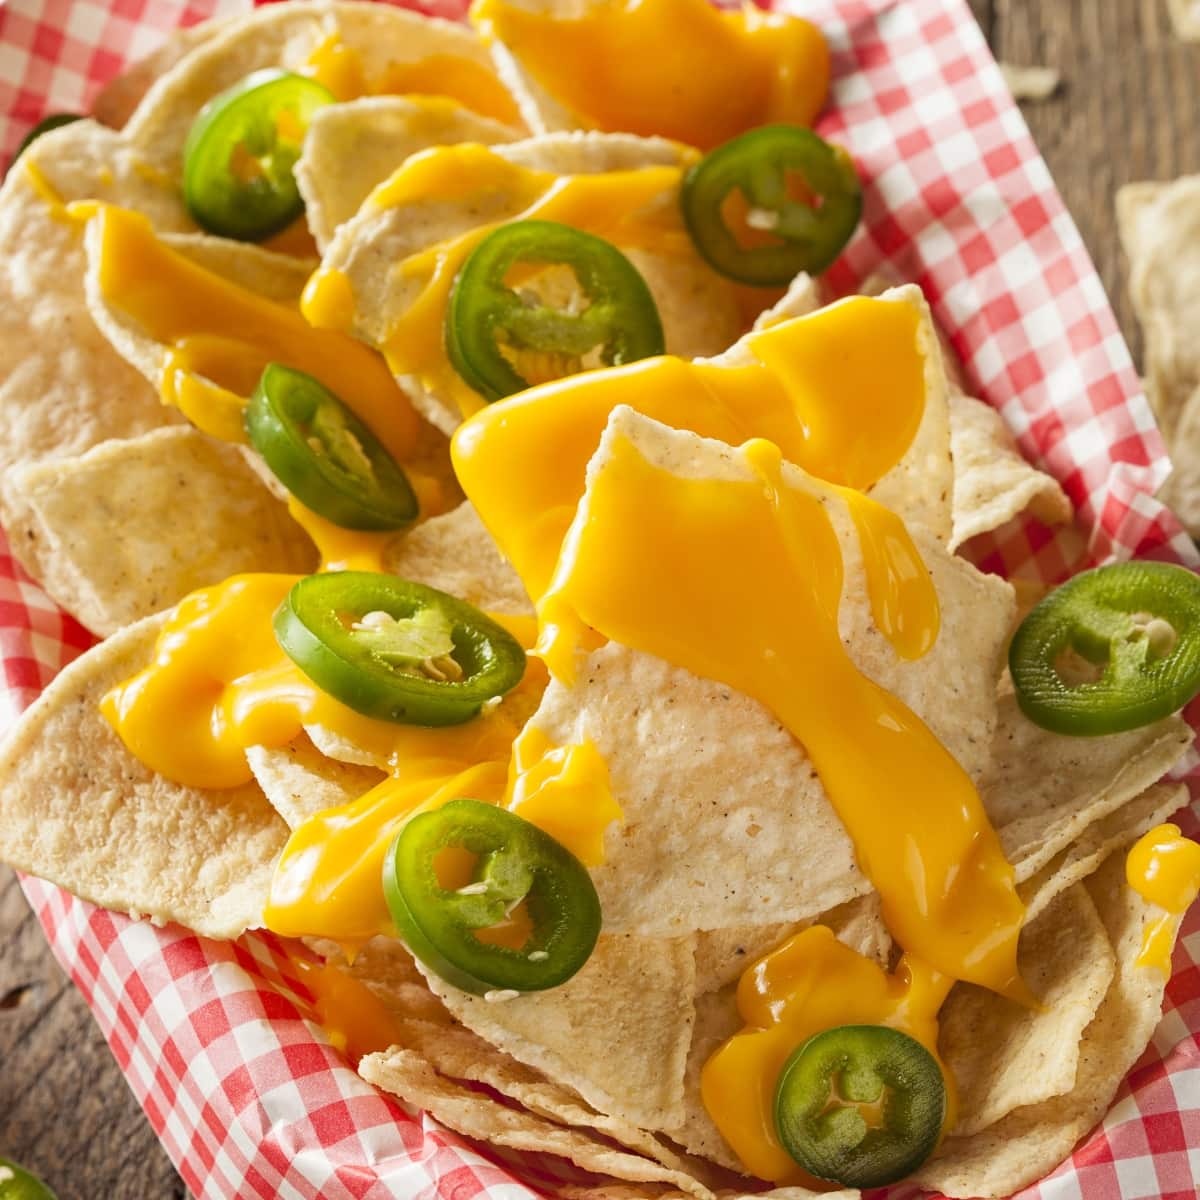 Homemade Nachos with Cheese and Jalapeno Peppers